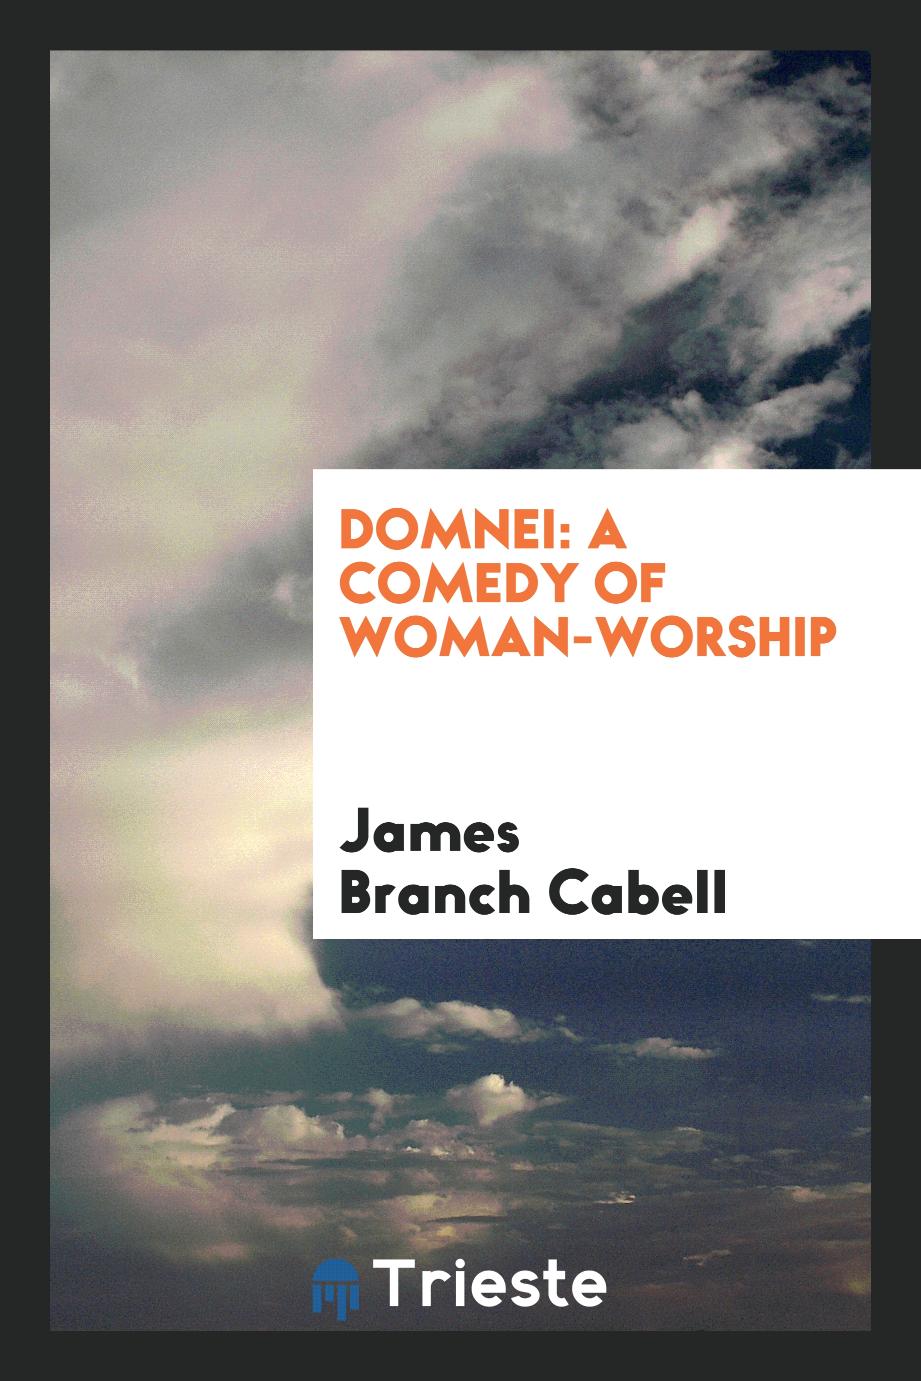 James Branch Cabell - Domnei: A Comedy of Woman-Worship